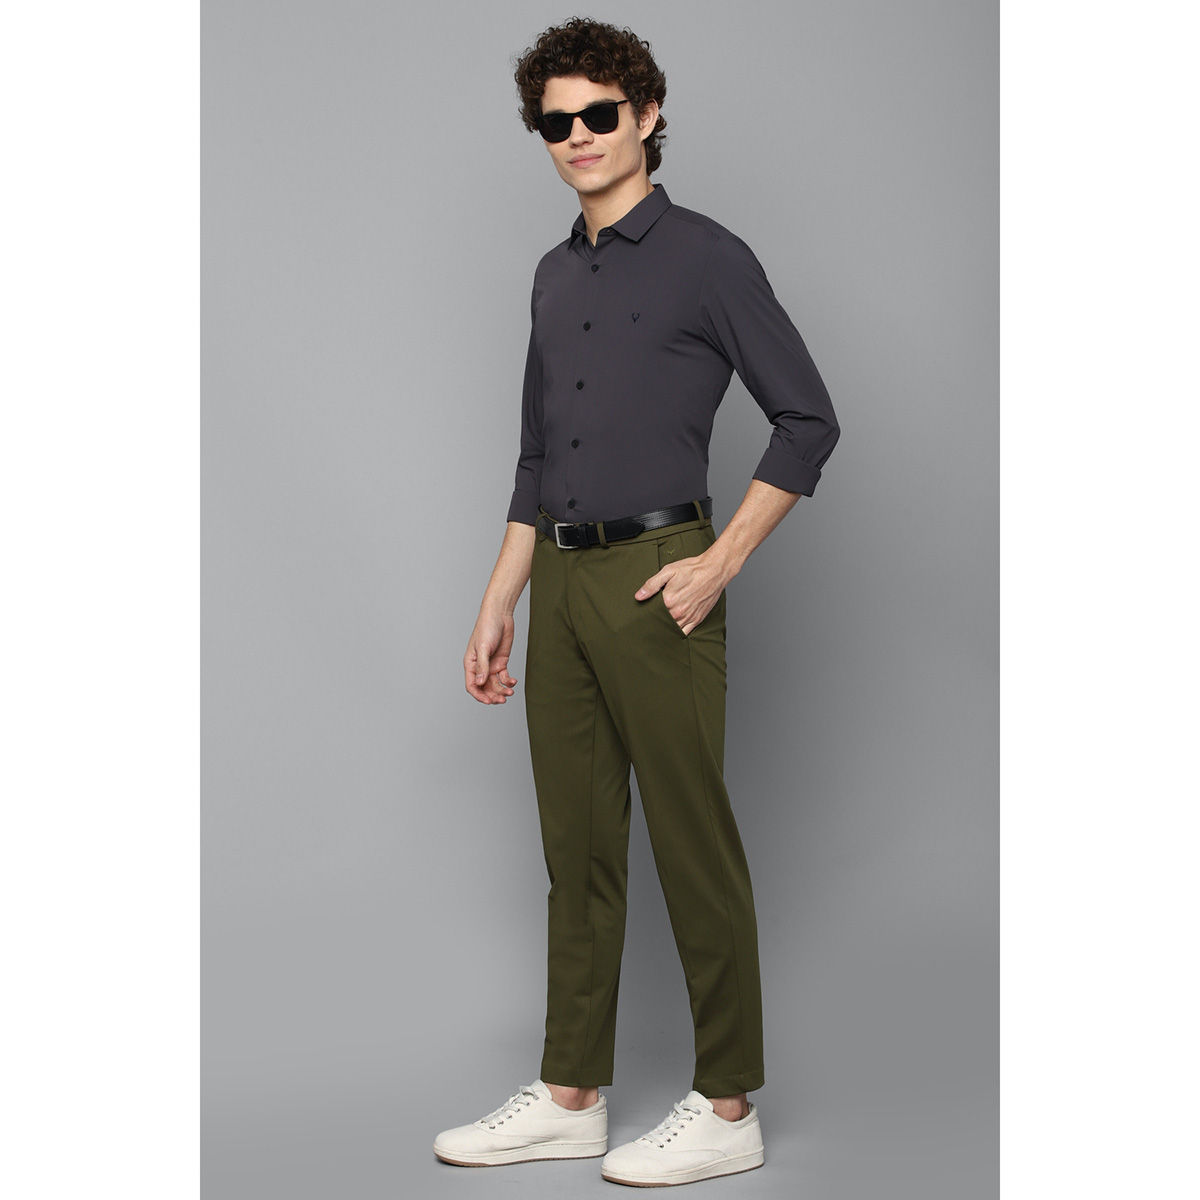 ALLEN SOLLY Boys Printed Casual Trousers | Lifestyle Stores | Rohini,  Sector 10 | New Delhi